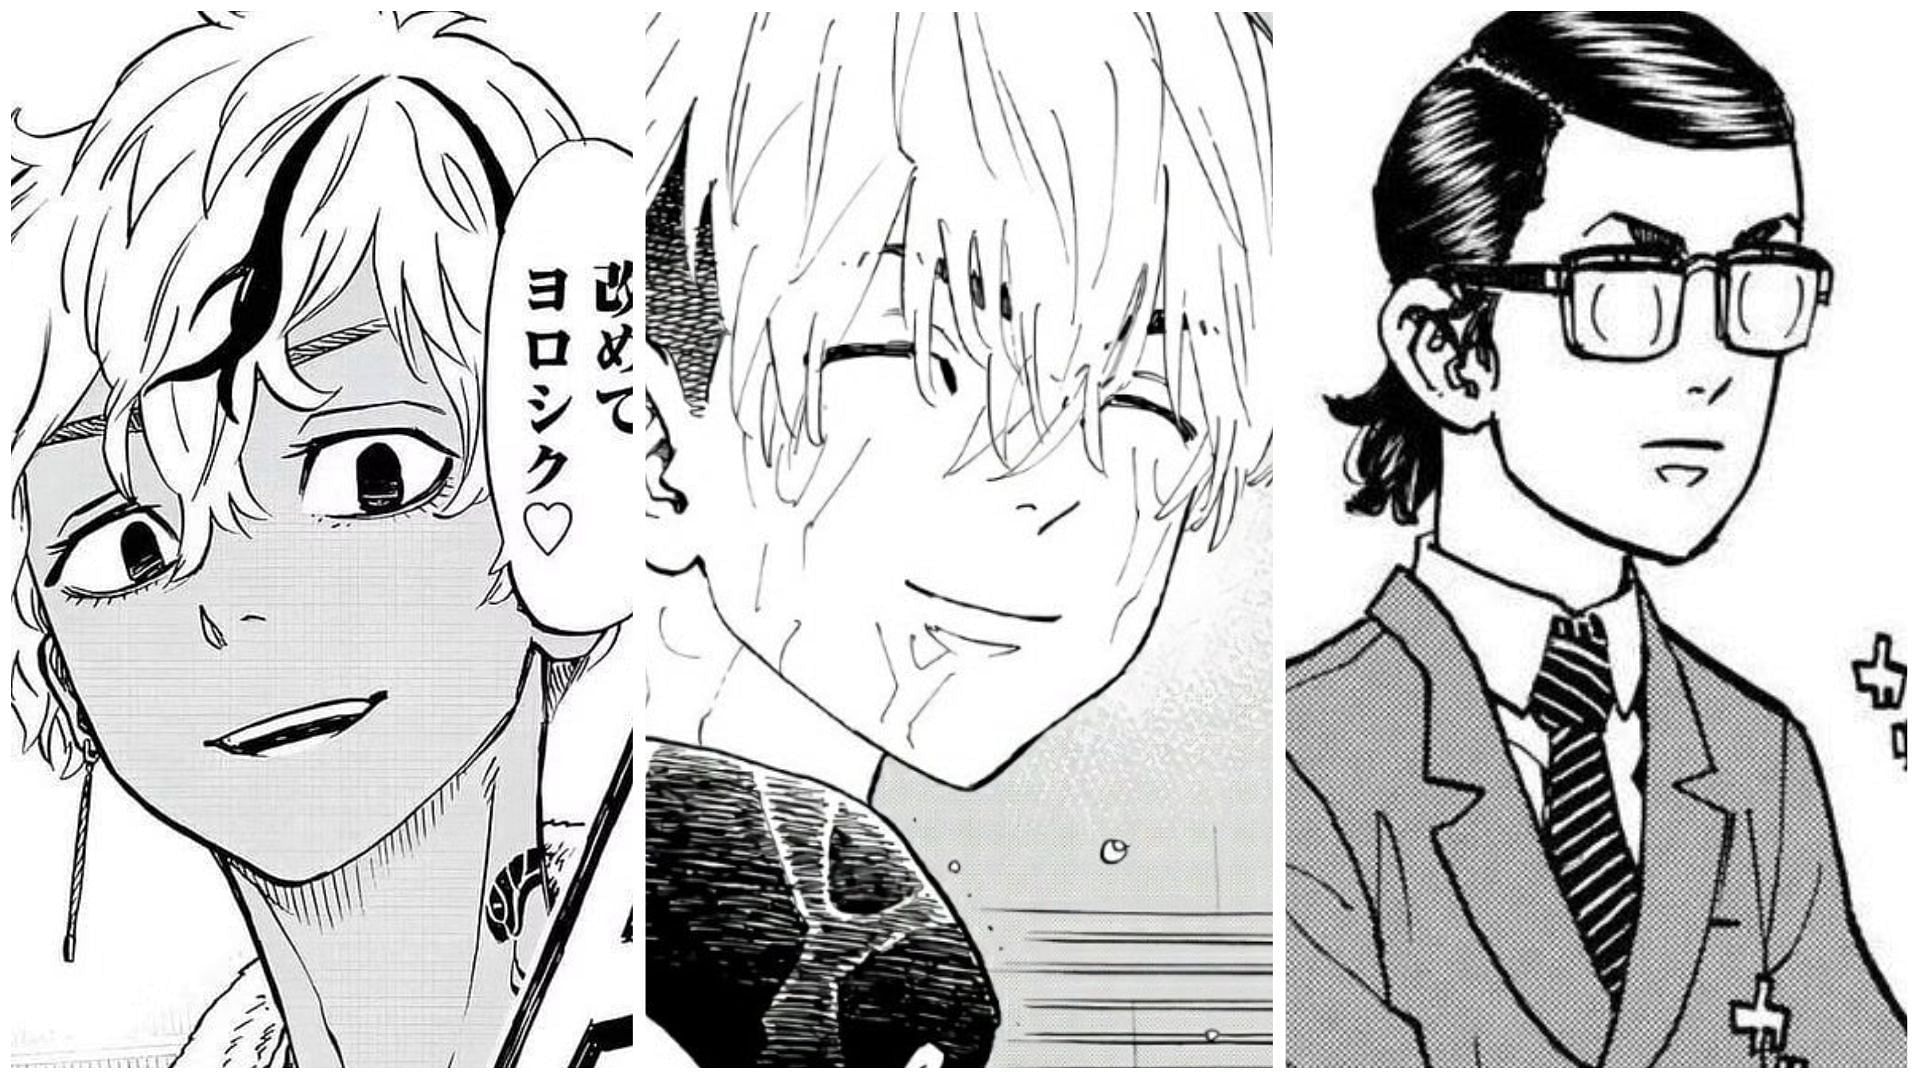 Spoilers from the upcoming chapter of the spin-off series feature Baji, Ryusei and Chifuyu working as a team (Images via Ken Wakui/Kodansha)